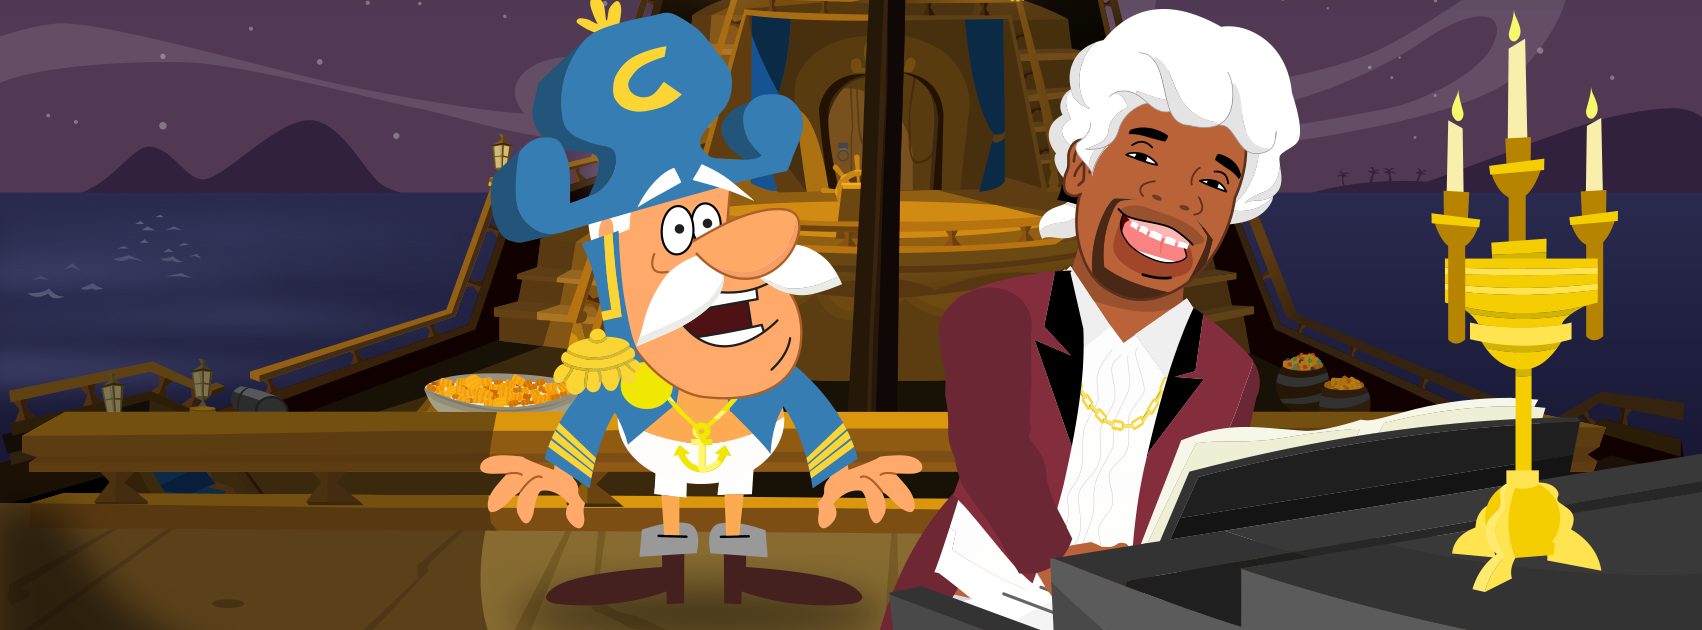 banner cartoon image of cereal cartoon character cap'n crunch kicking a football. The image shows a website html